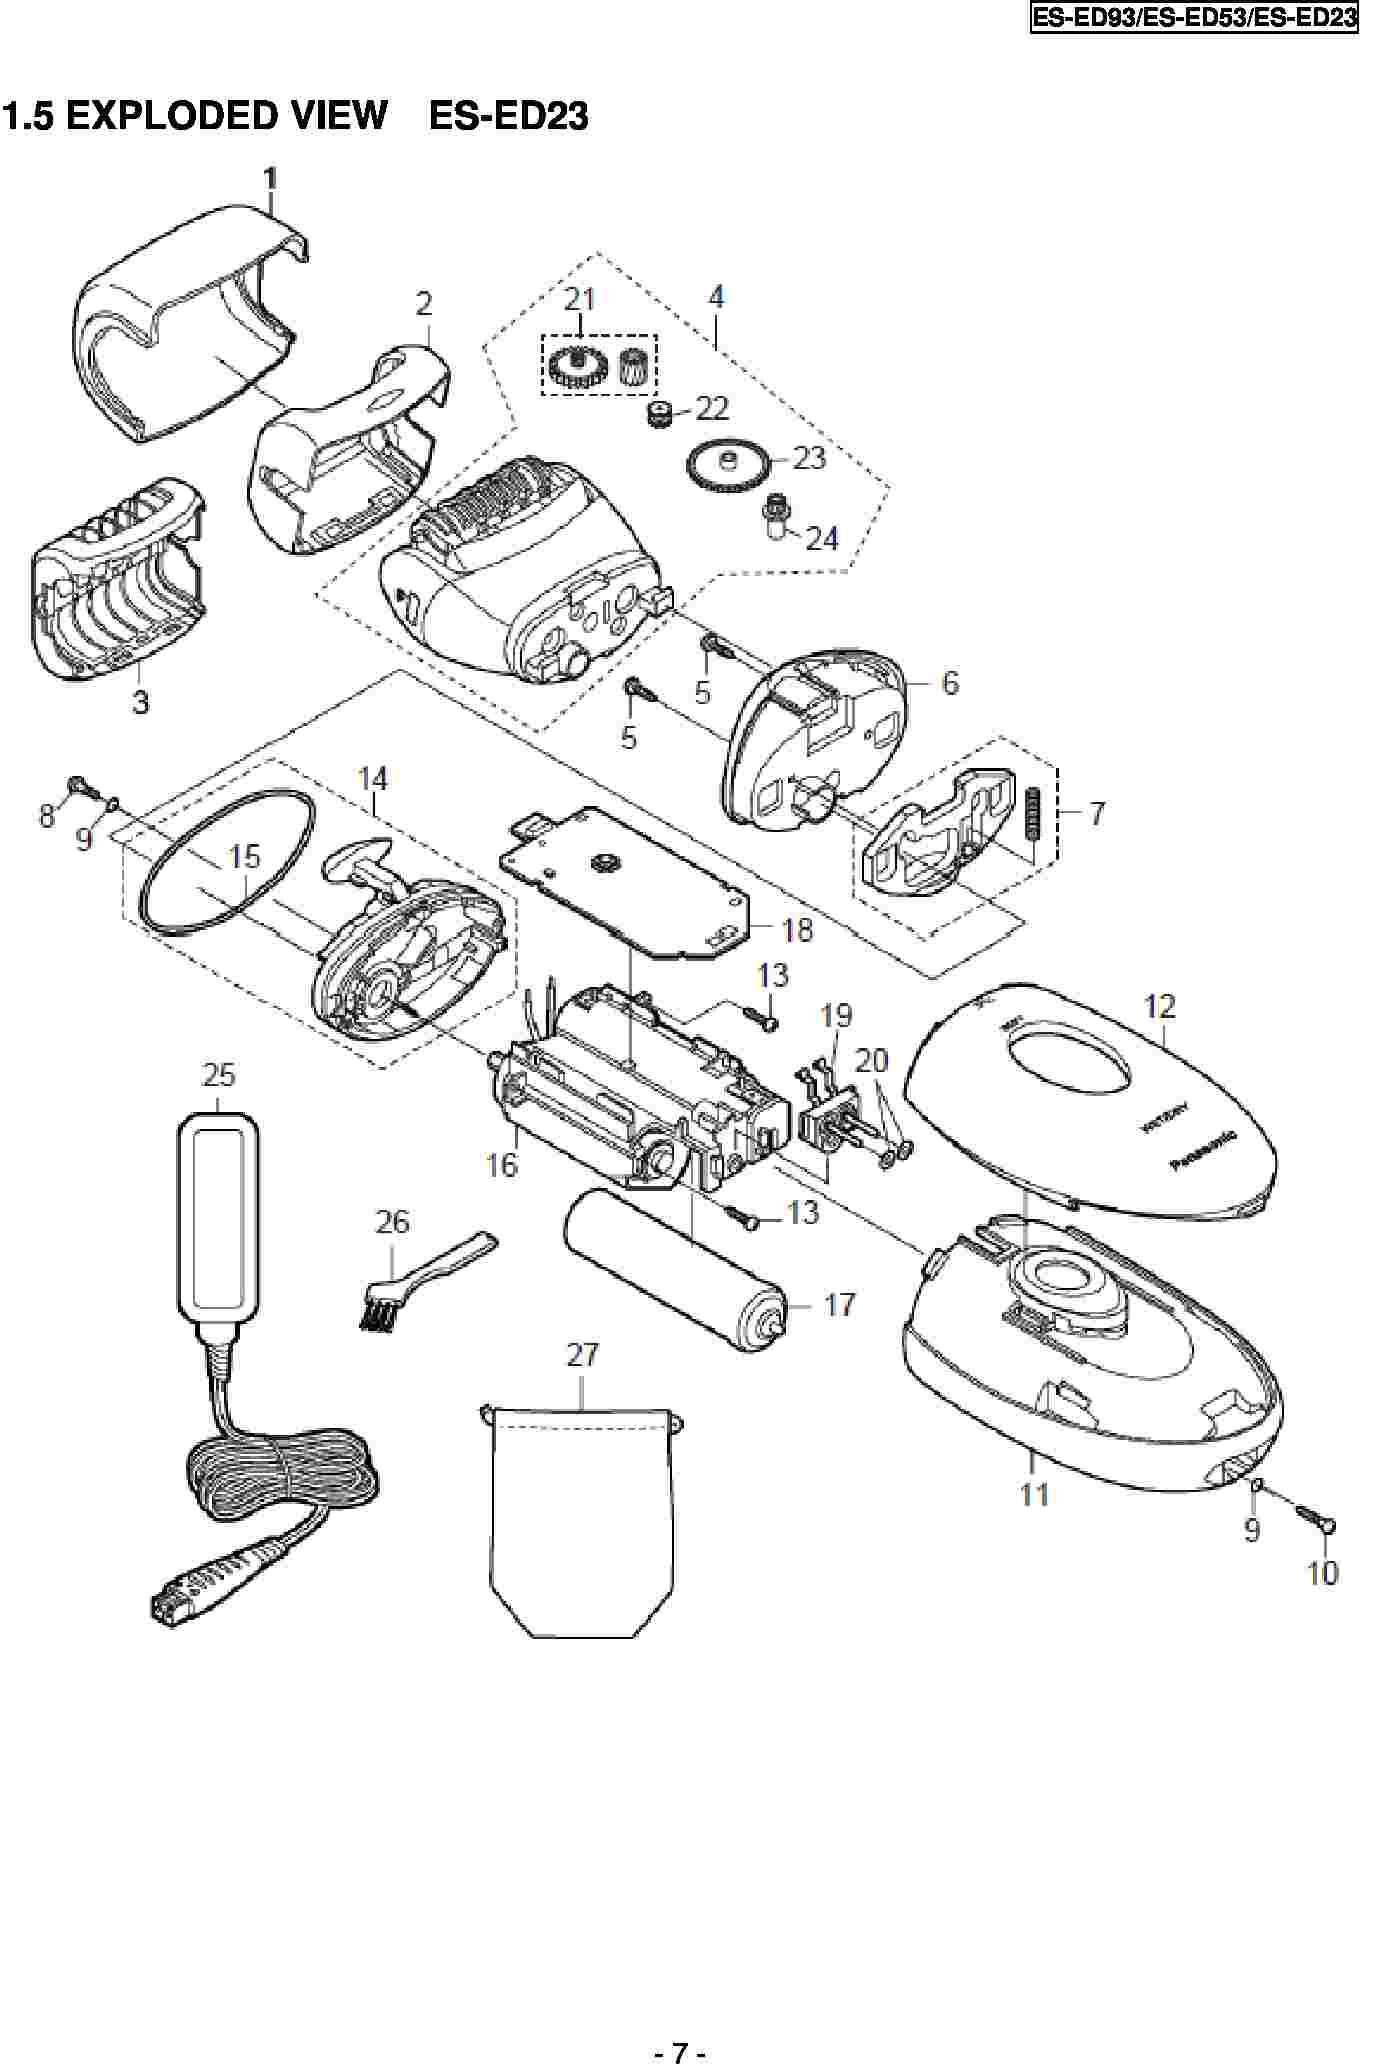 ES-ED23: Exploded View